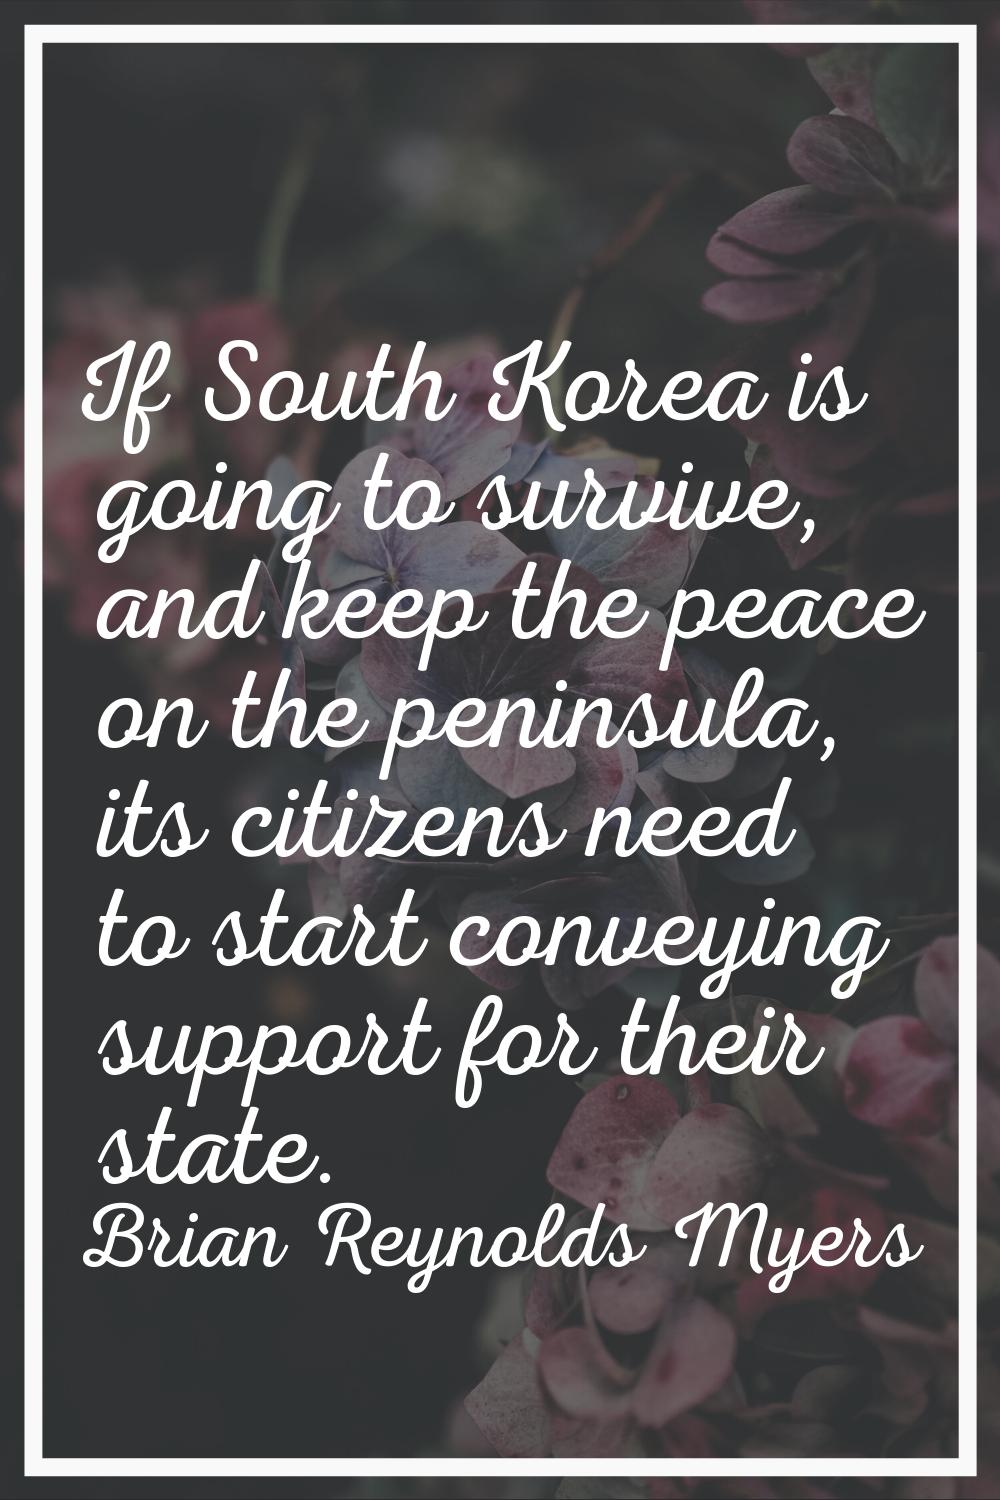 If South Korea is going to survive, and keep the peace on the peninsula, its citizens need to start